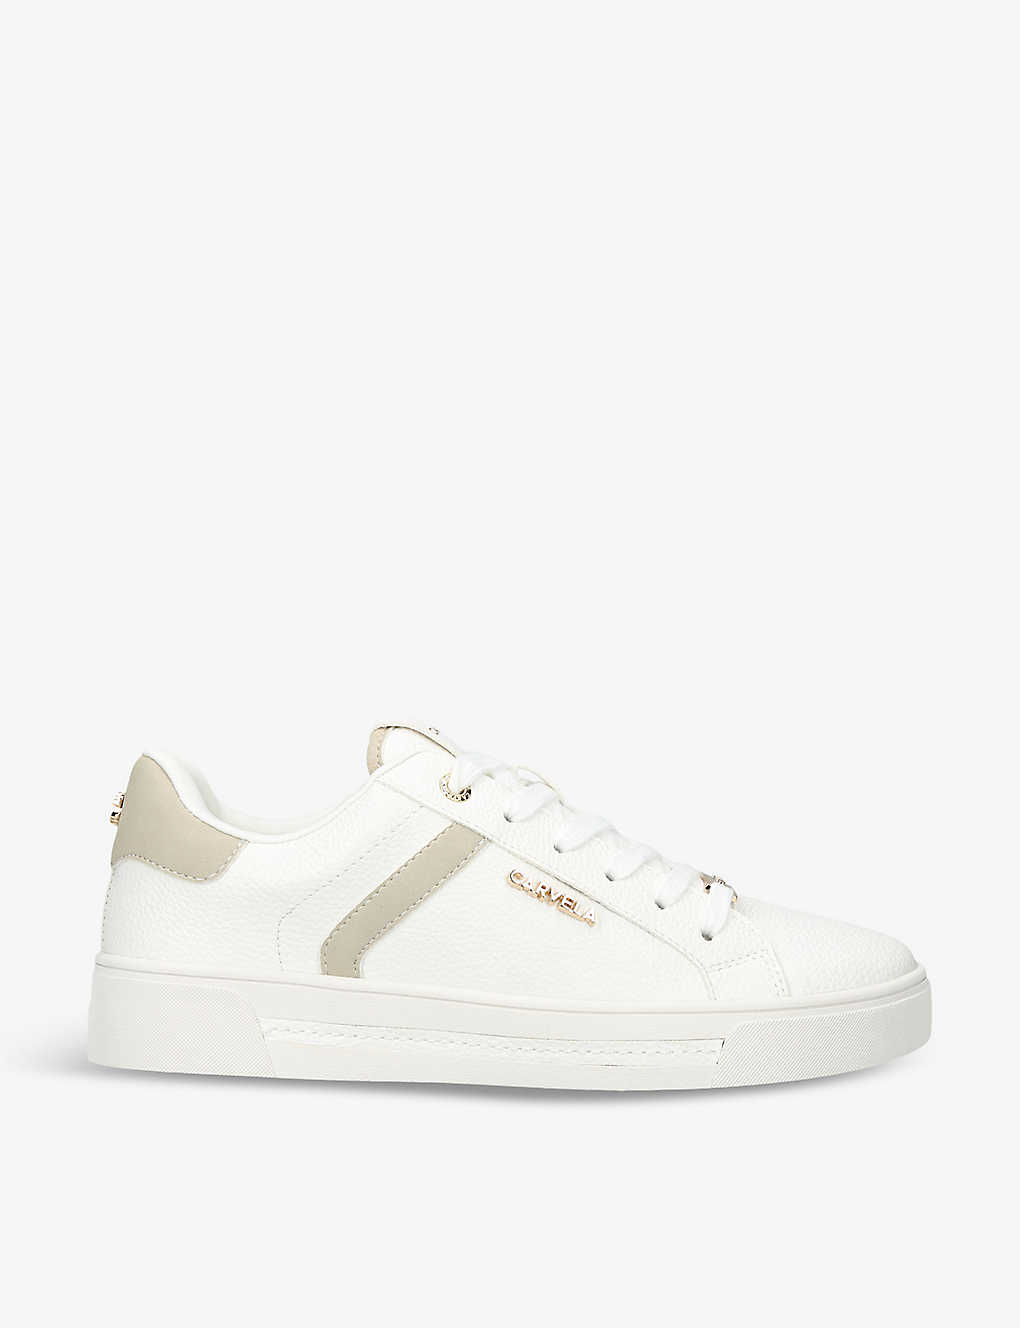 Carvela Daze Faux-leather Low-top Trainers In White/comb